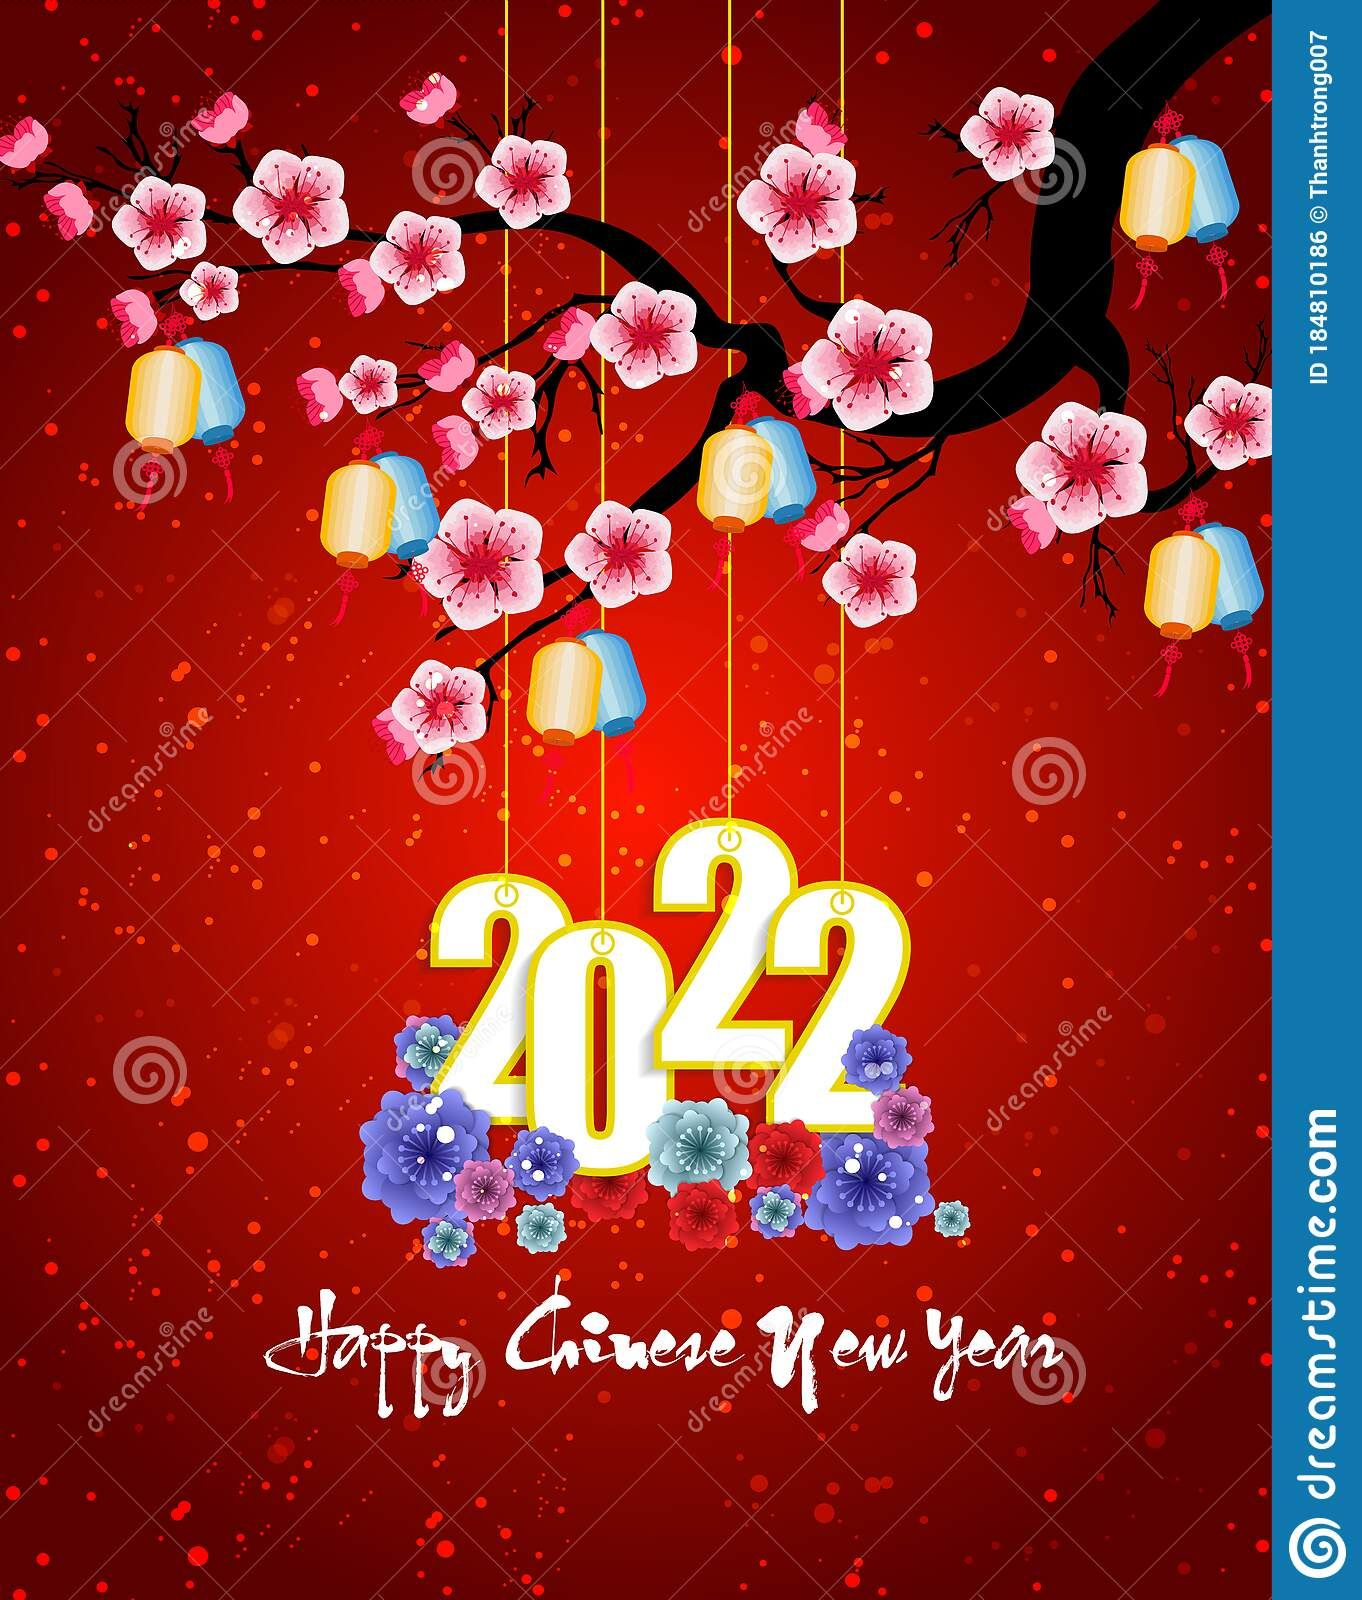 Chinese New Year 2022 - Year Of The Tiger. Lunar New Year